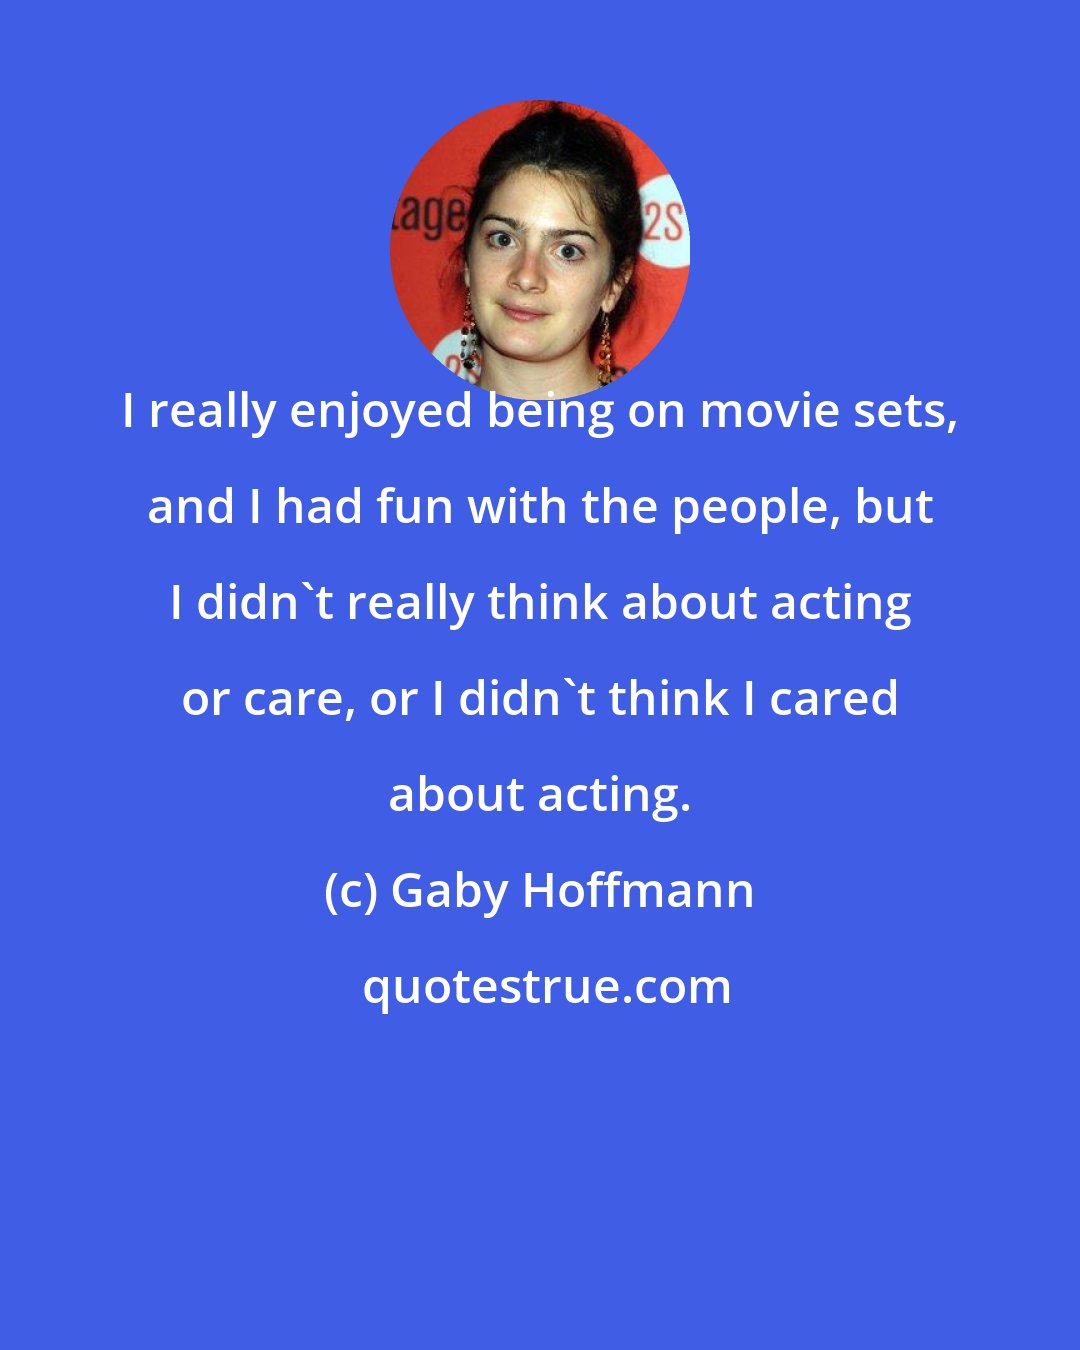 Gaby Hoffmann: I really enjoyed being on movie sets, and I had fun with the people, but I didn't really think about acting or care, or I didn't think I cared about acting.